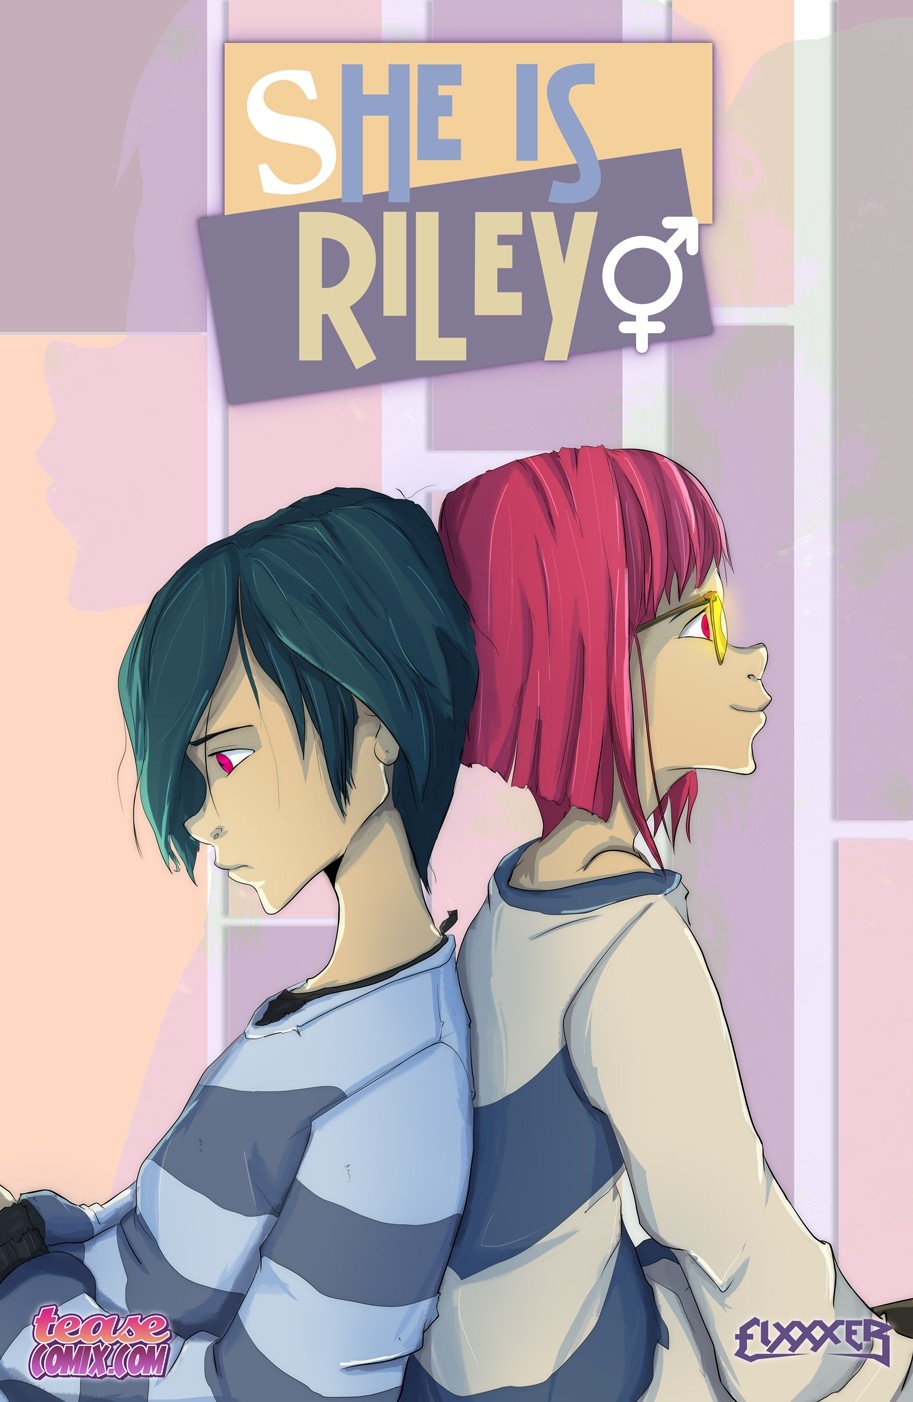 She Is Riley